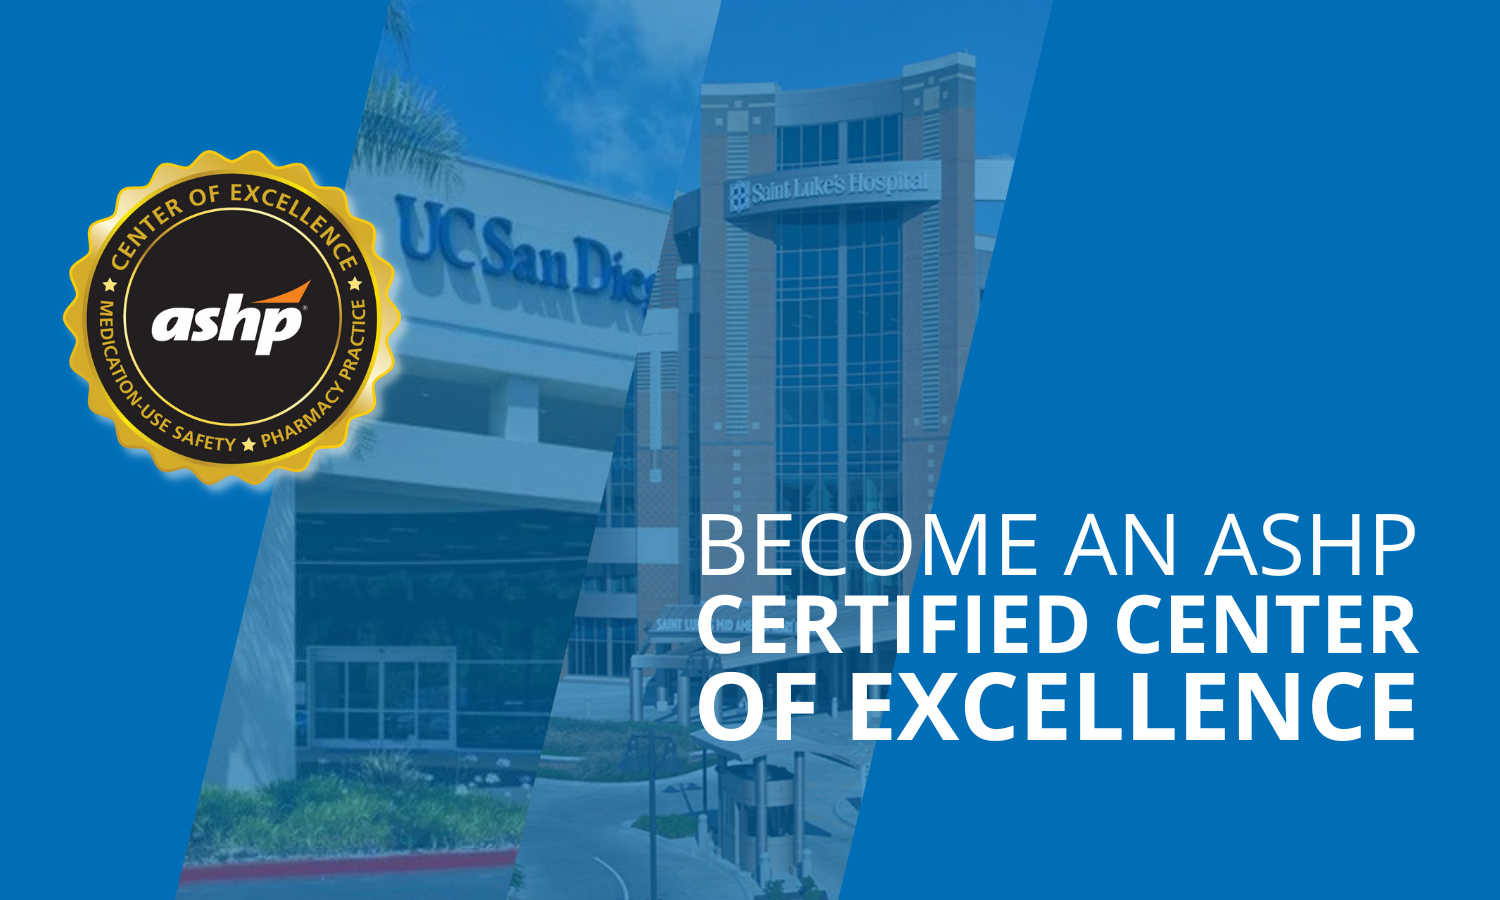 ashp logo - become an ashp certified center of excellence